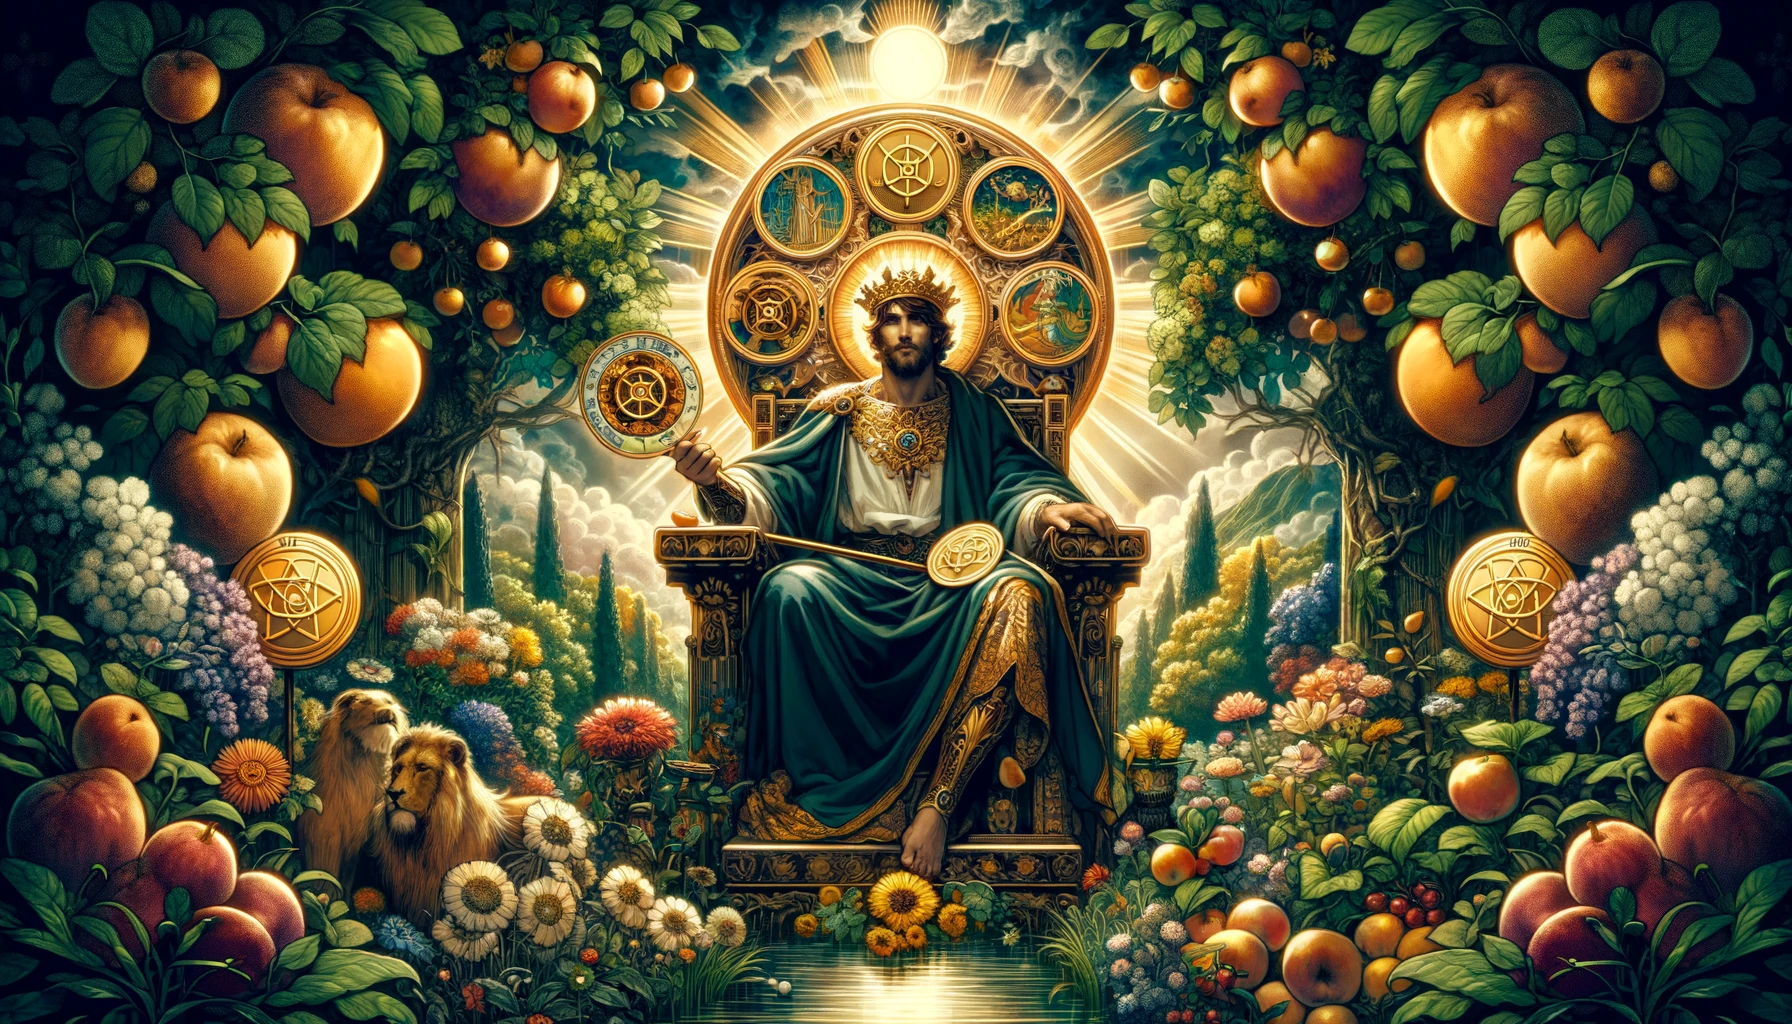 The image shows the King of Pentacles seated on a majestic throne adorned with intricate carvings, surrounded by lush greenery and blooming flowers. He exudes an aura of confidence and stability, with a pentacle in one hand and a scepter in the other. The garden setting symbolizes fertility, growth, and abundance, while the King's presence signifies wealth and material success within the realm of love and relationships.